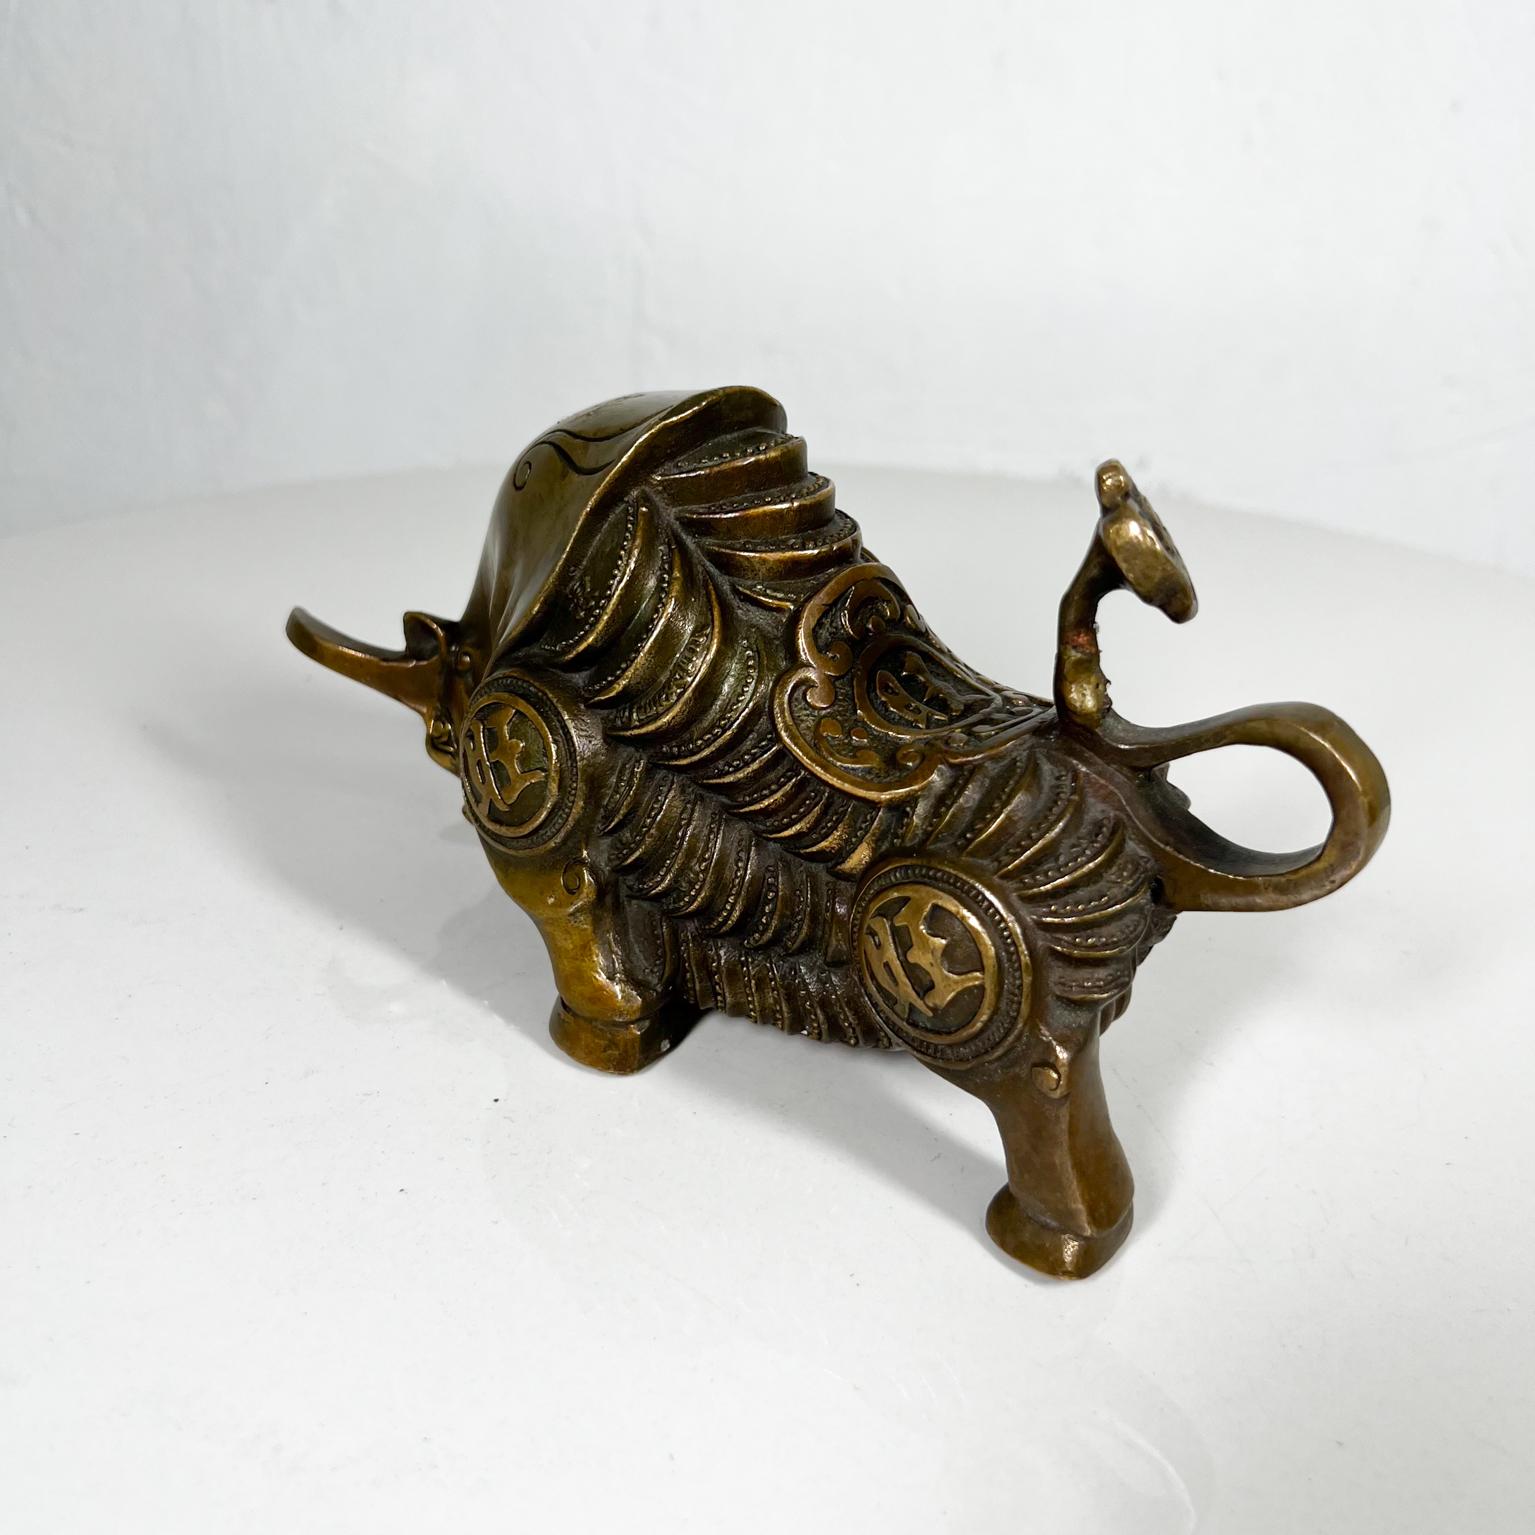 Vintage Feng Shui Gilt Bronze Bull Ox Money Figurine In Good Condition For Sale In Chula Vista, CA